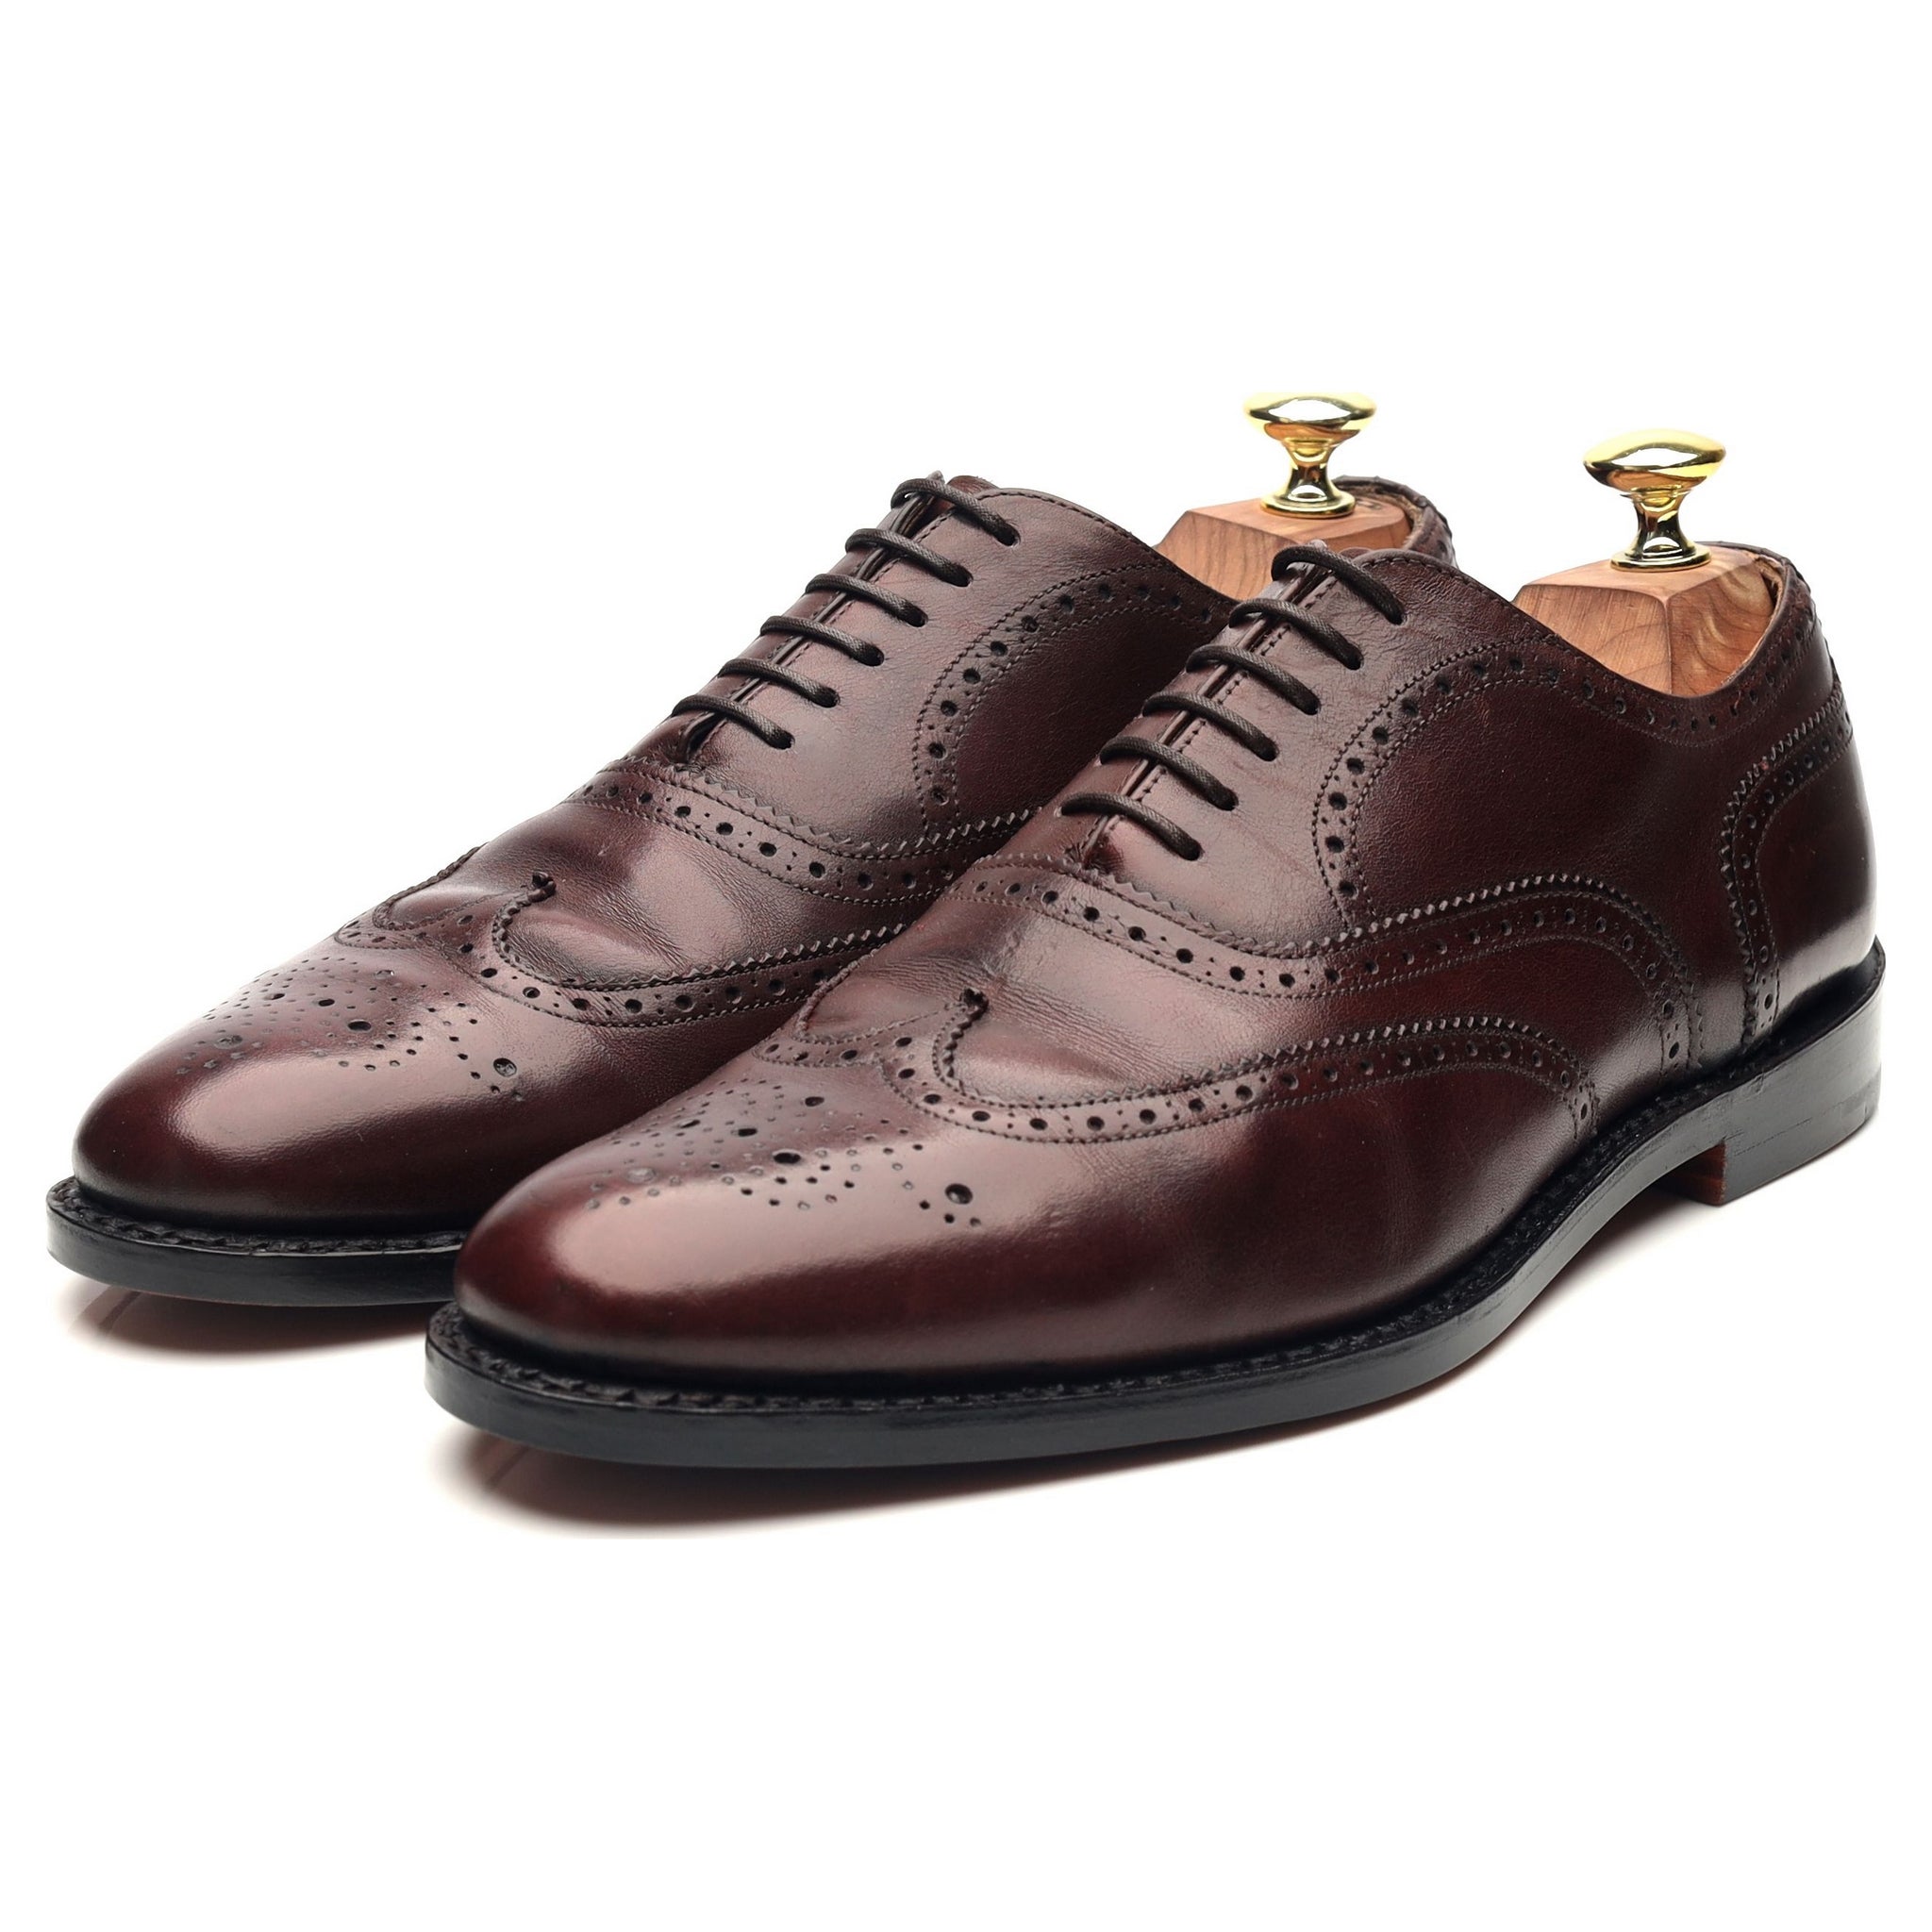 Burgundy Leather Brogues UK 6.5 F - Abbot's Shoes